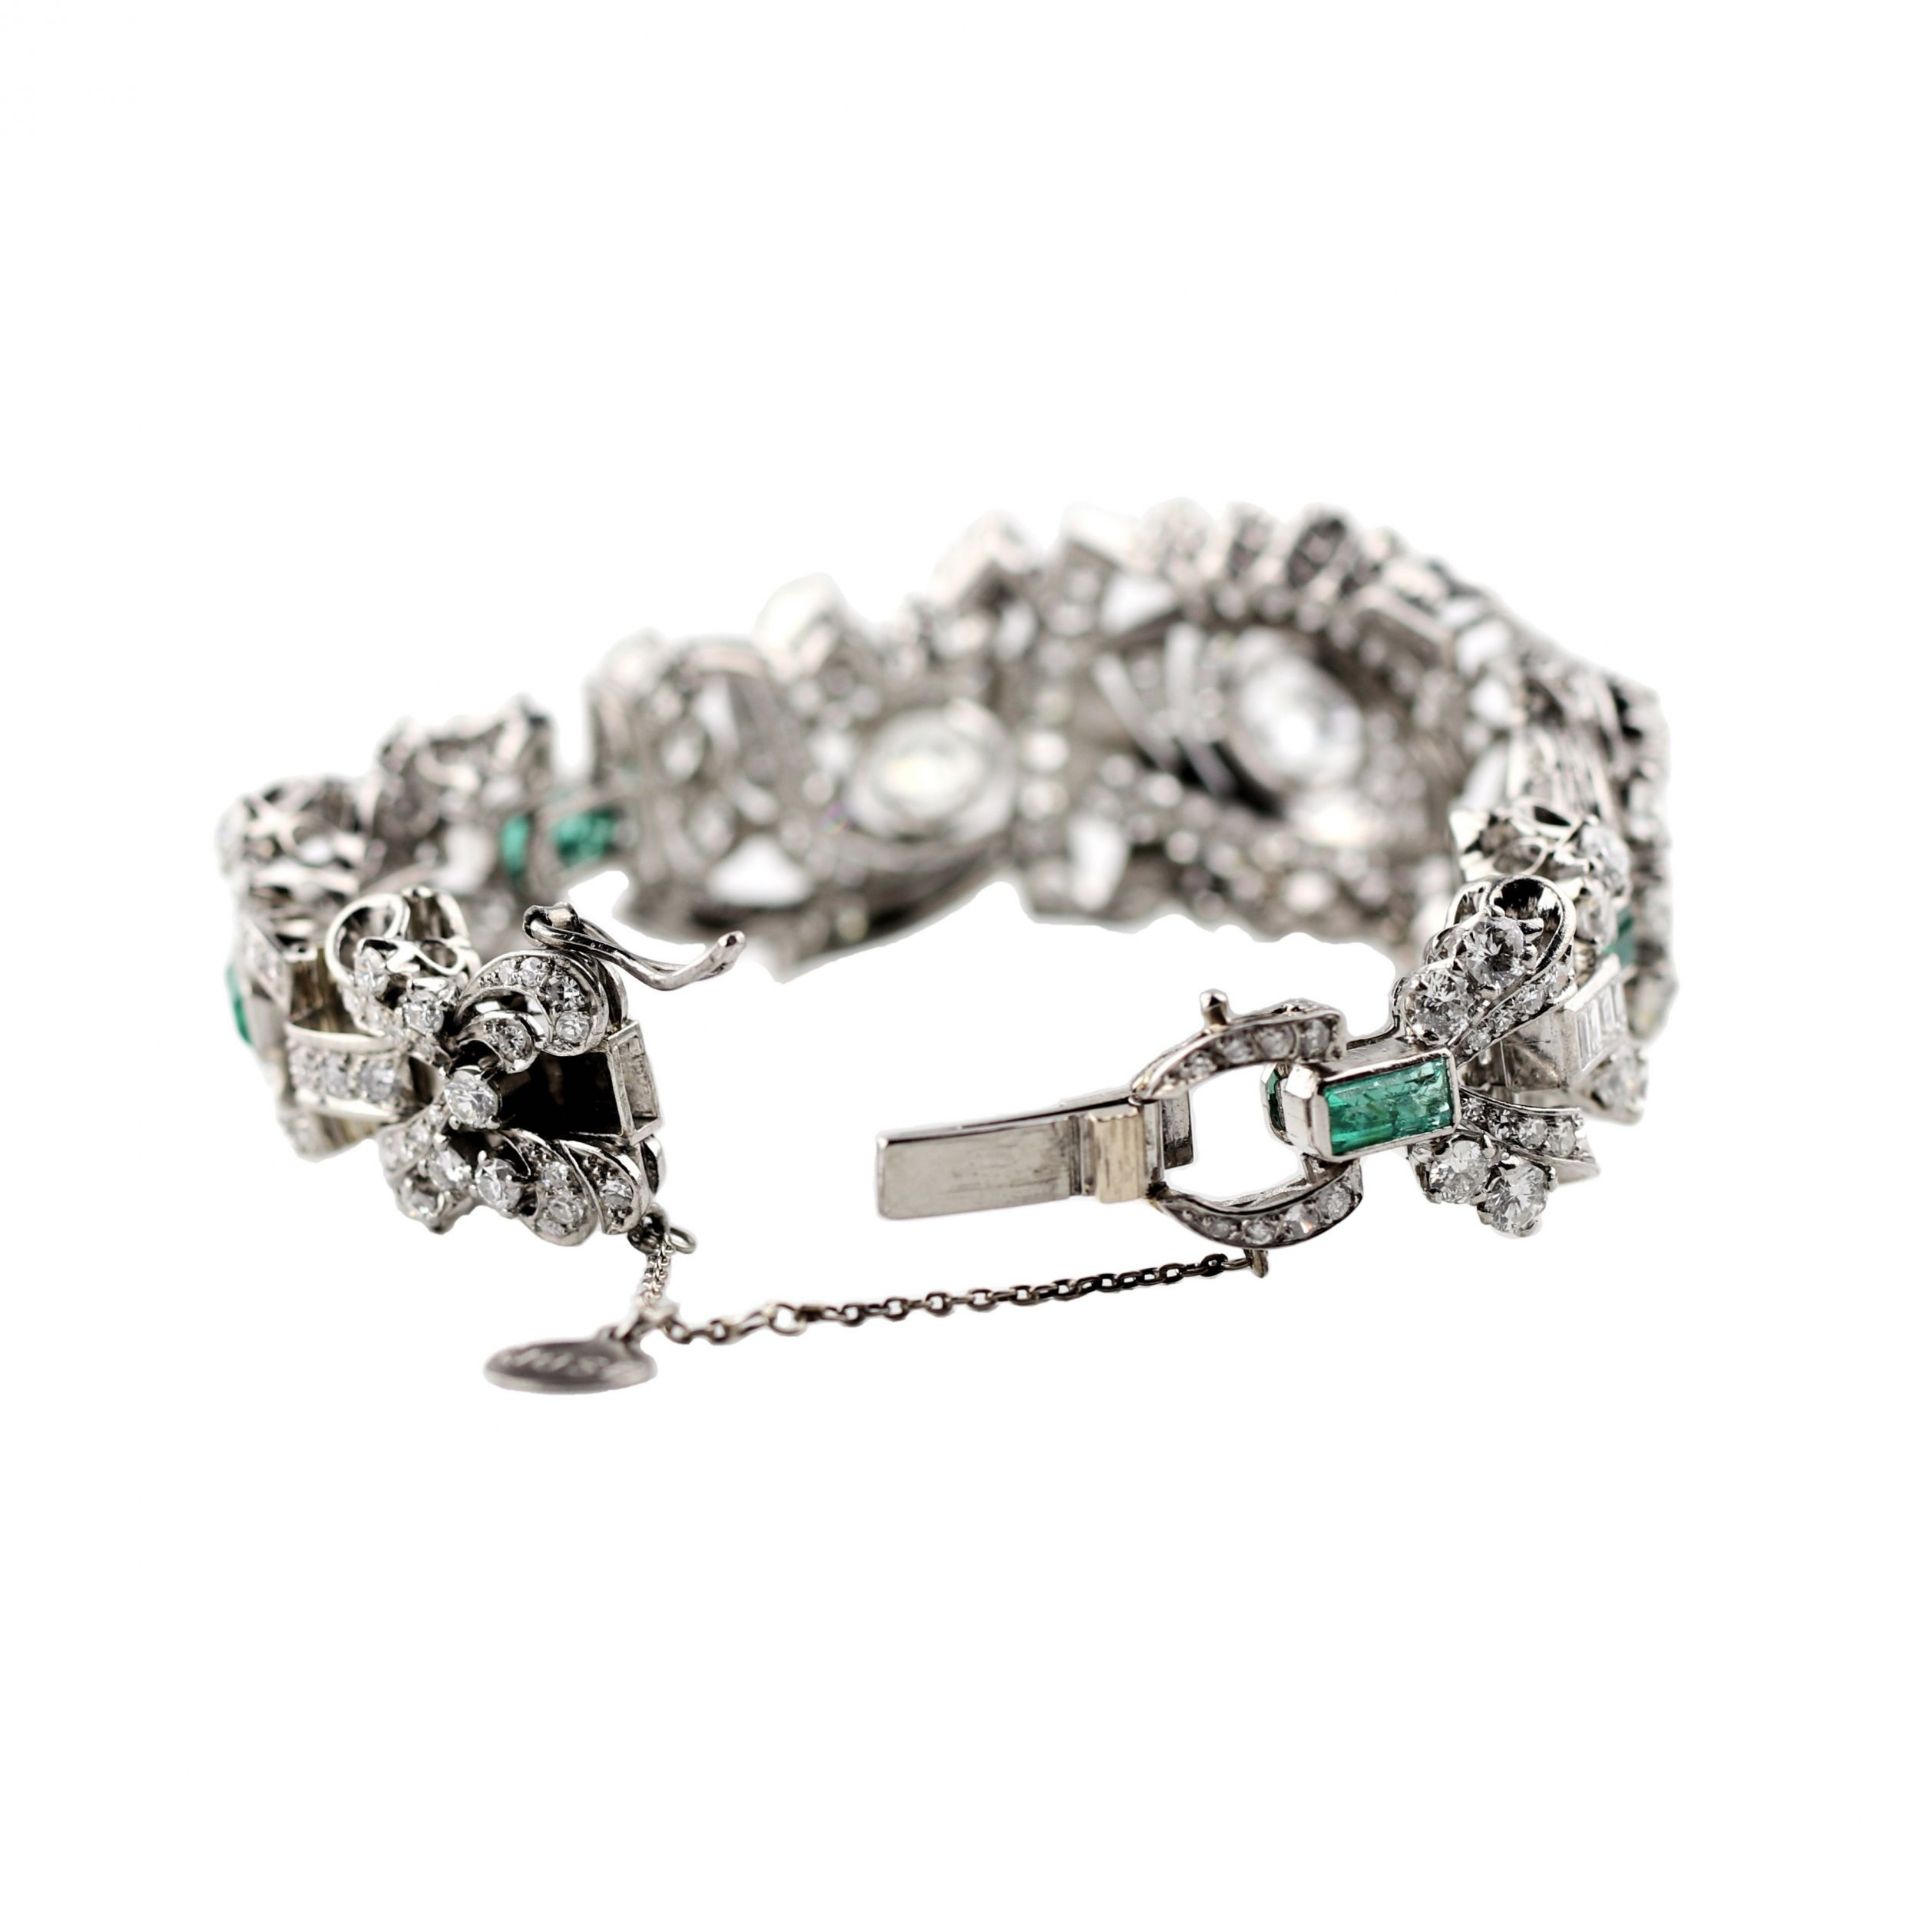 White gold bracelet with diamonds and emeralds - Image 5 of 6